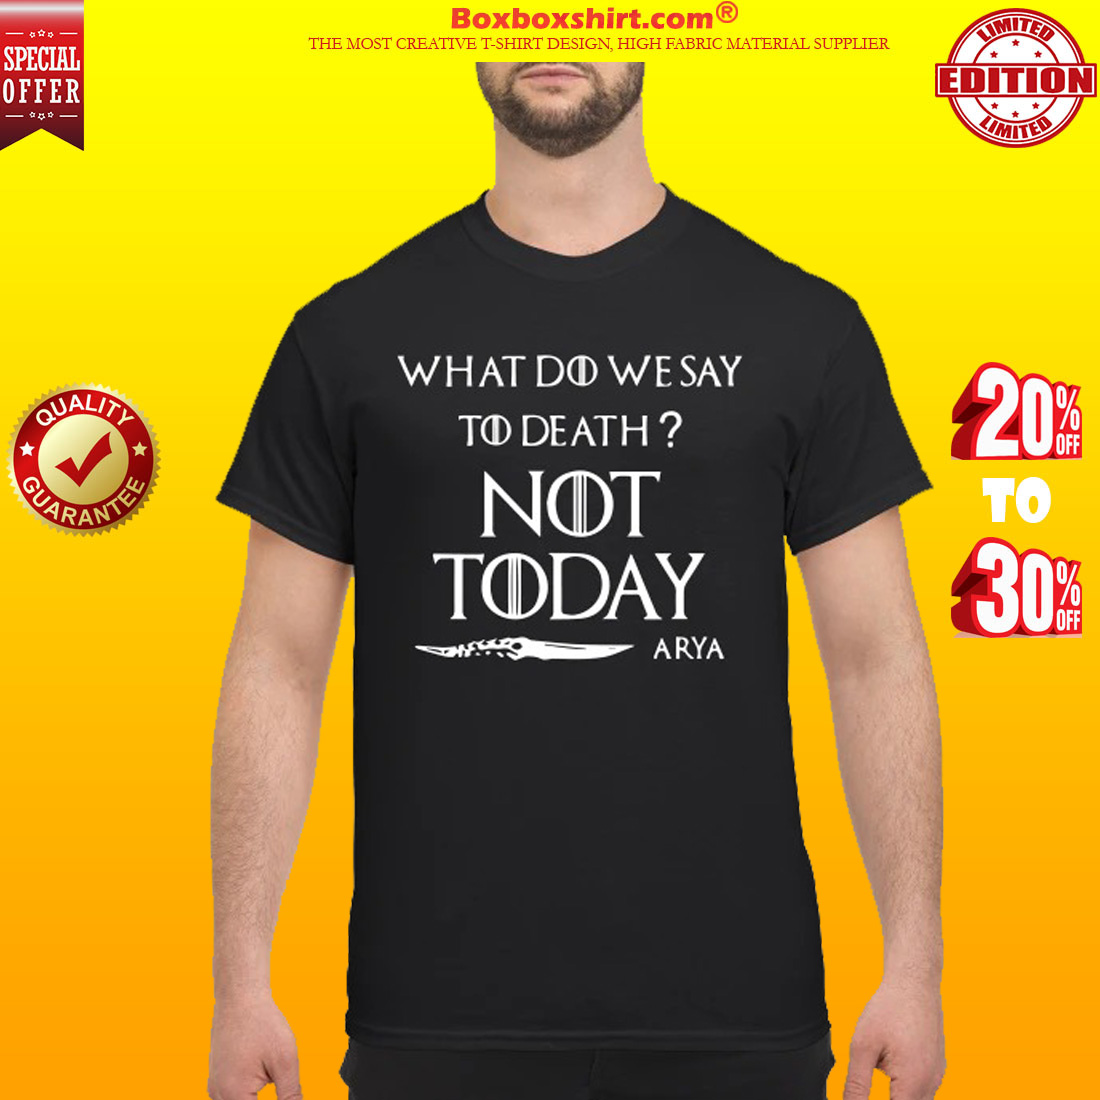 What do we say to death not day Arya classic shirt